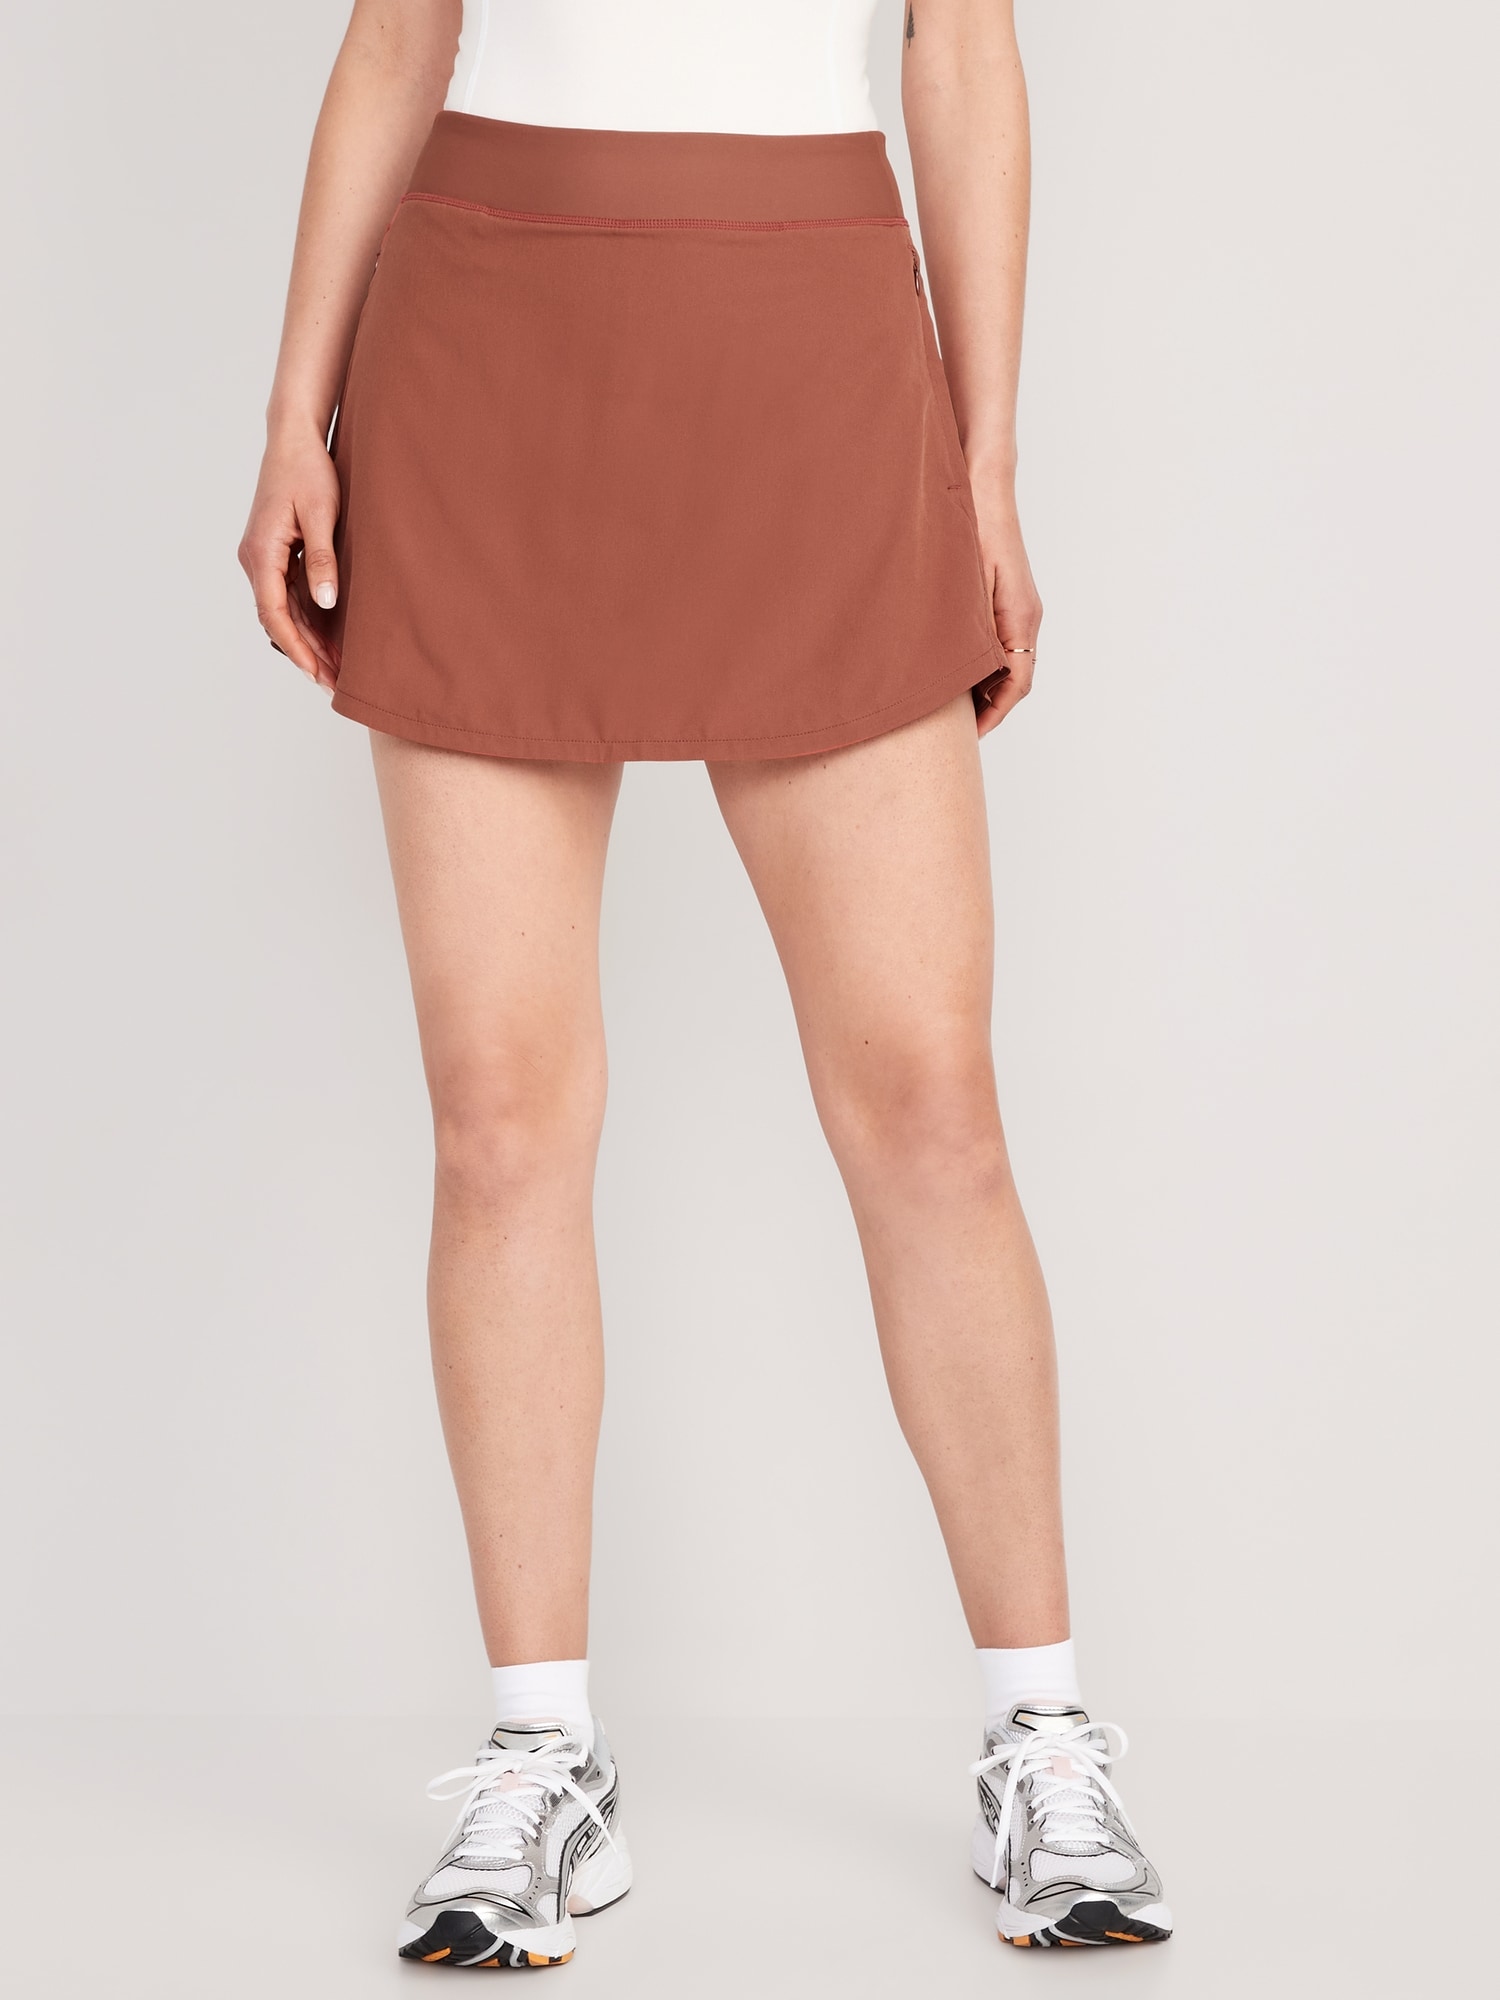 Old Navy - High-Waisted StretchTech Pleated 2-in-1 Skort for Women